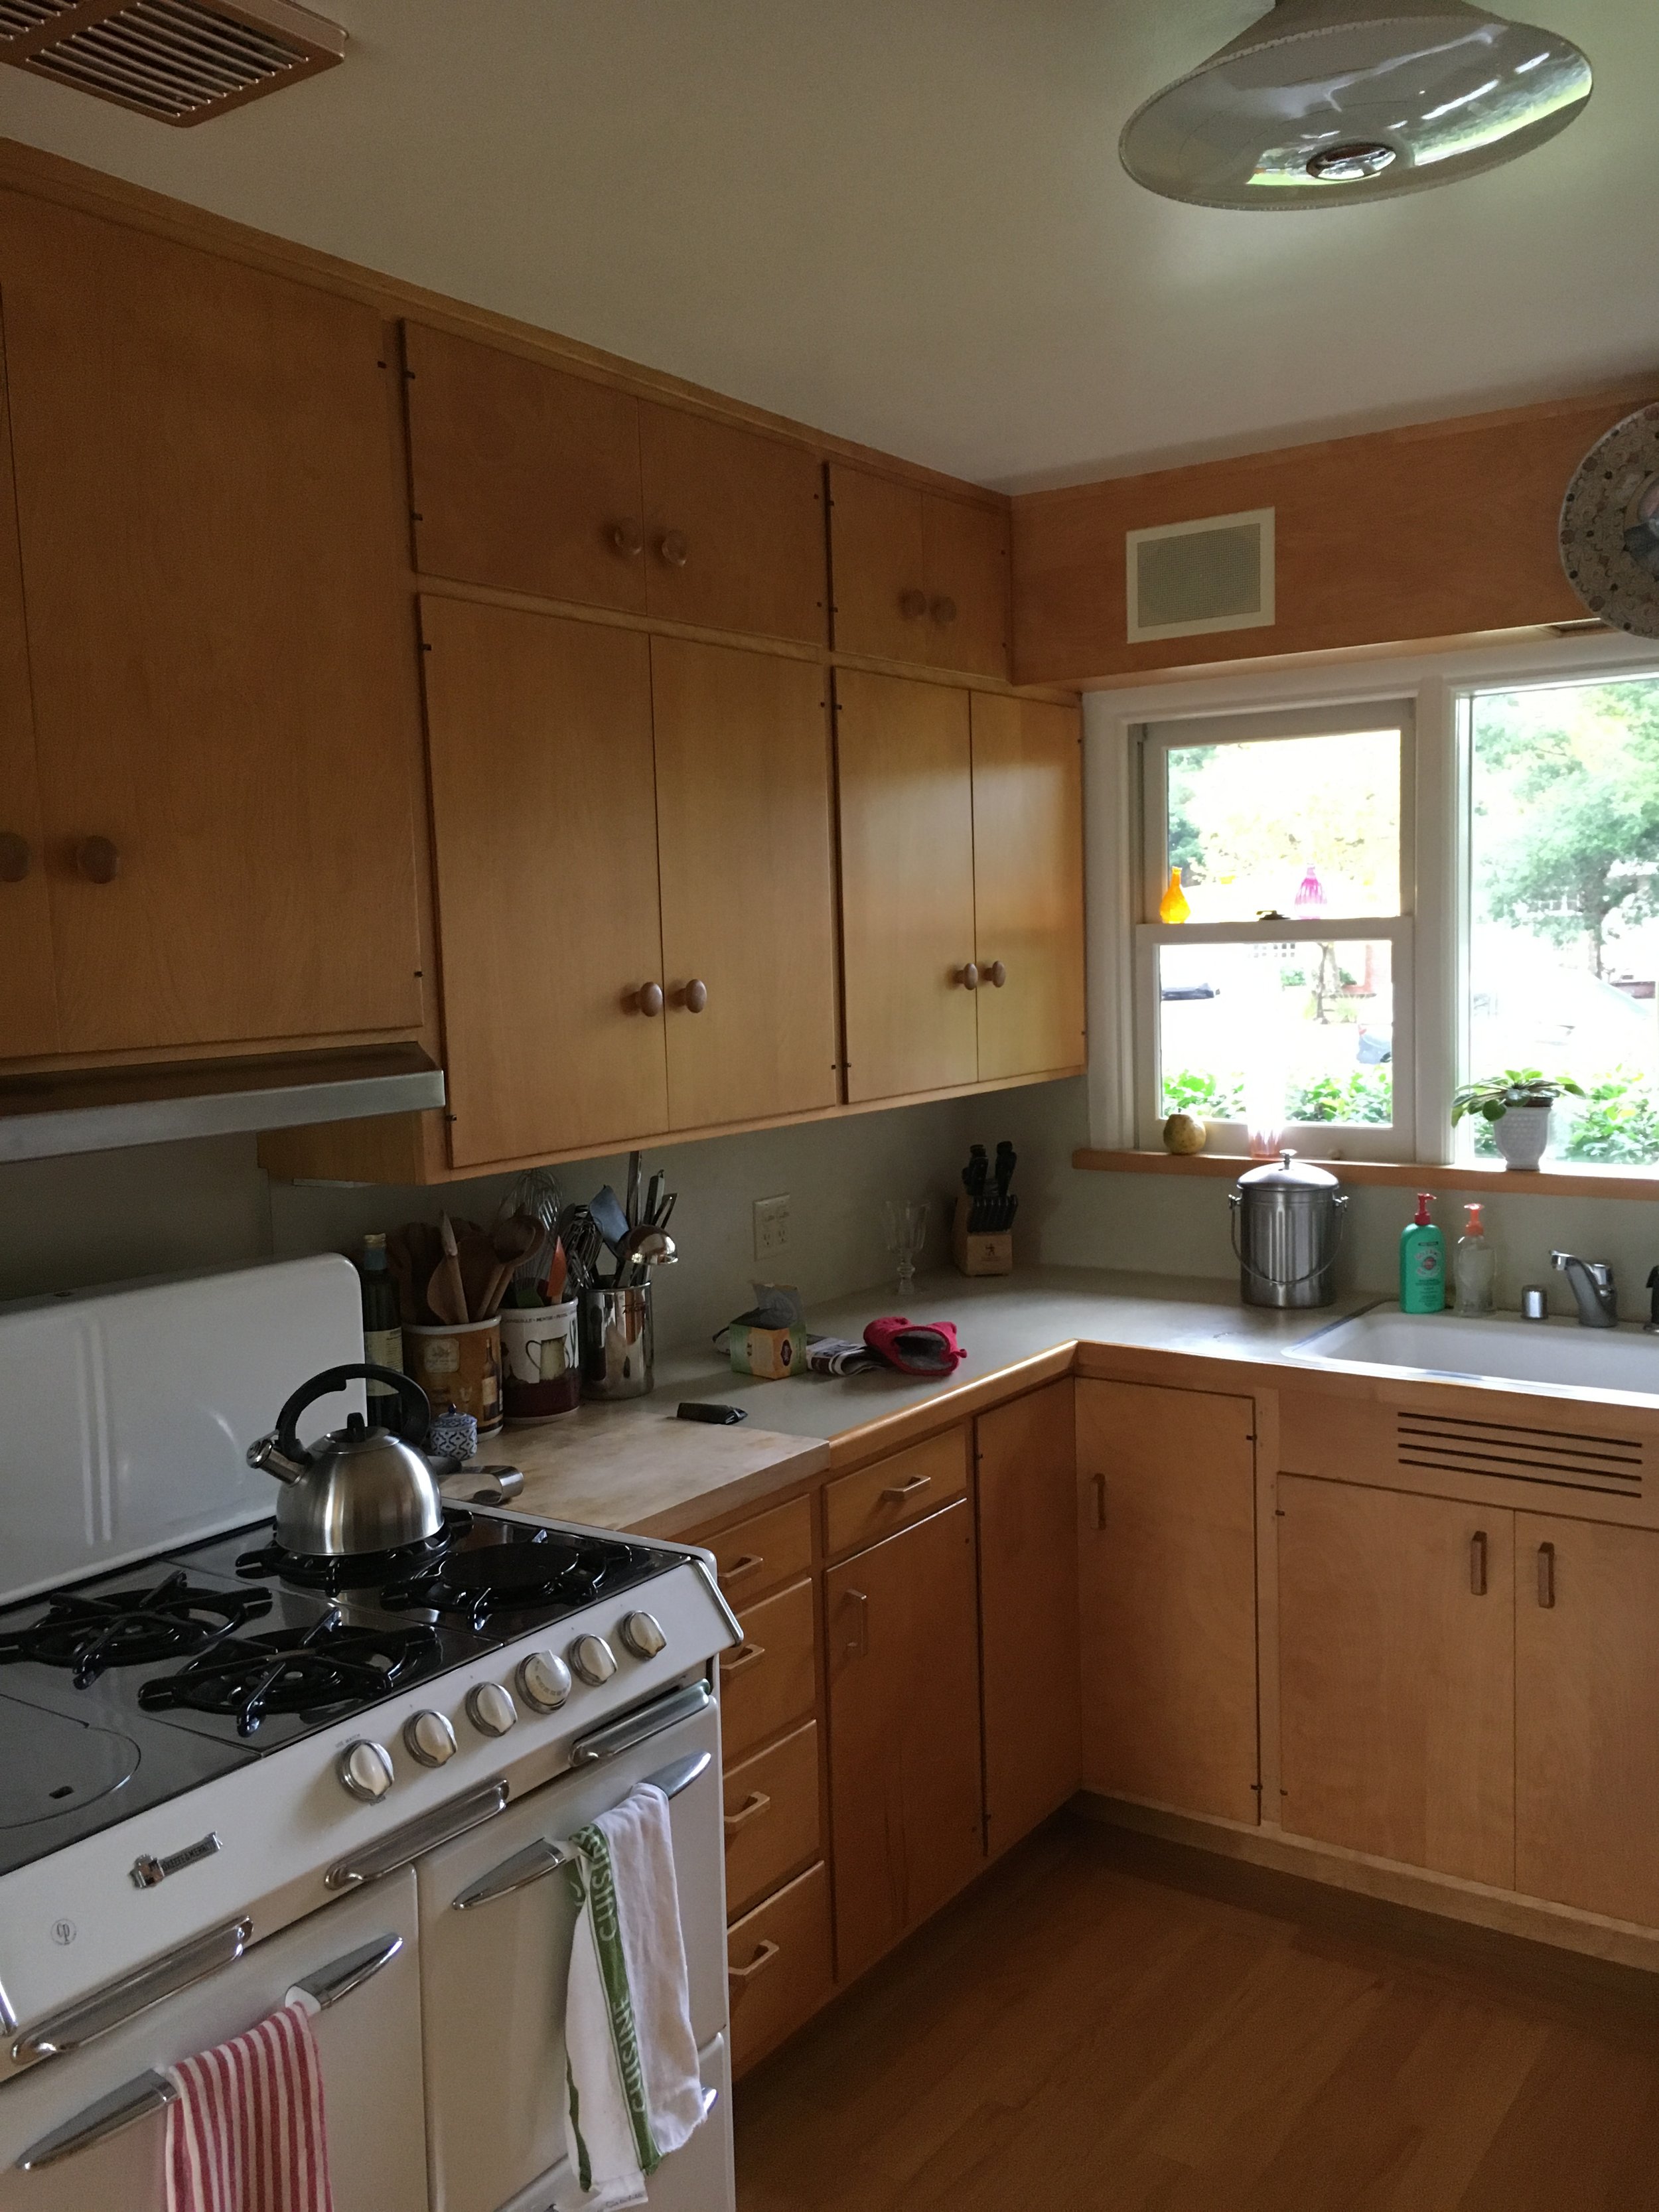  The same kitchen with warm wood cabinets from another angle. The window above the sink and dishwasher is visible. The white stove is protruding past the countertops.  